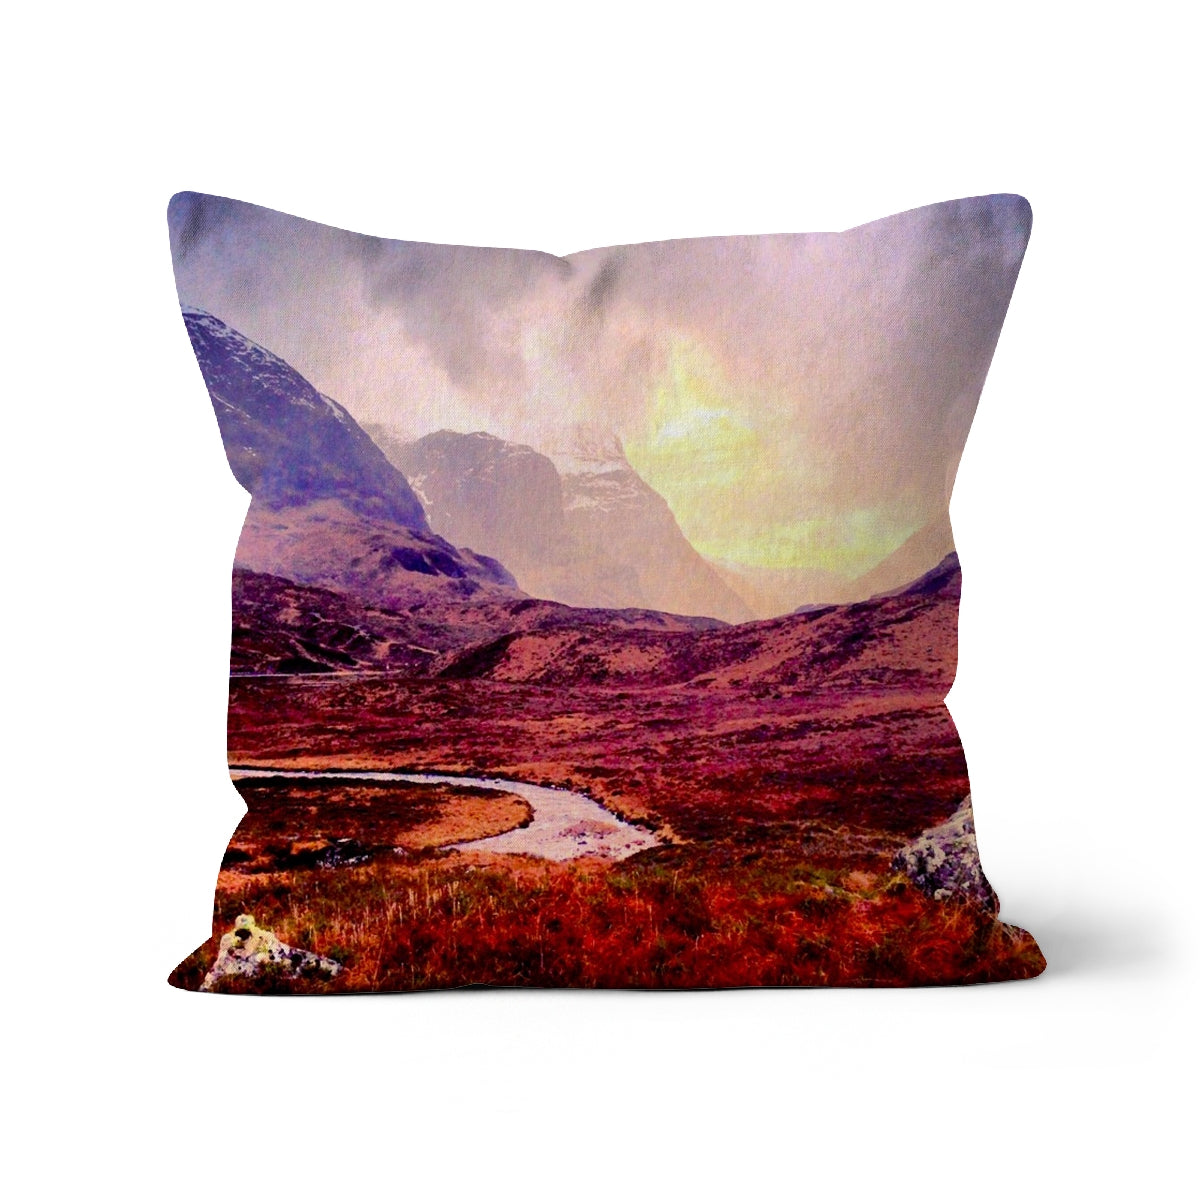 A Brooding Glencoe Art Gifts Cushion-Cushions-Glencoe Art Gallery-Faux Suede-18"x18"-Paintings, Prints, Homeware, Art Gifts From Scotland By Scottish Artist Kevin Hunter